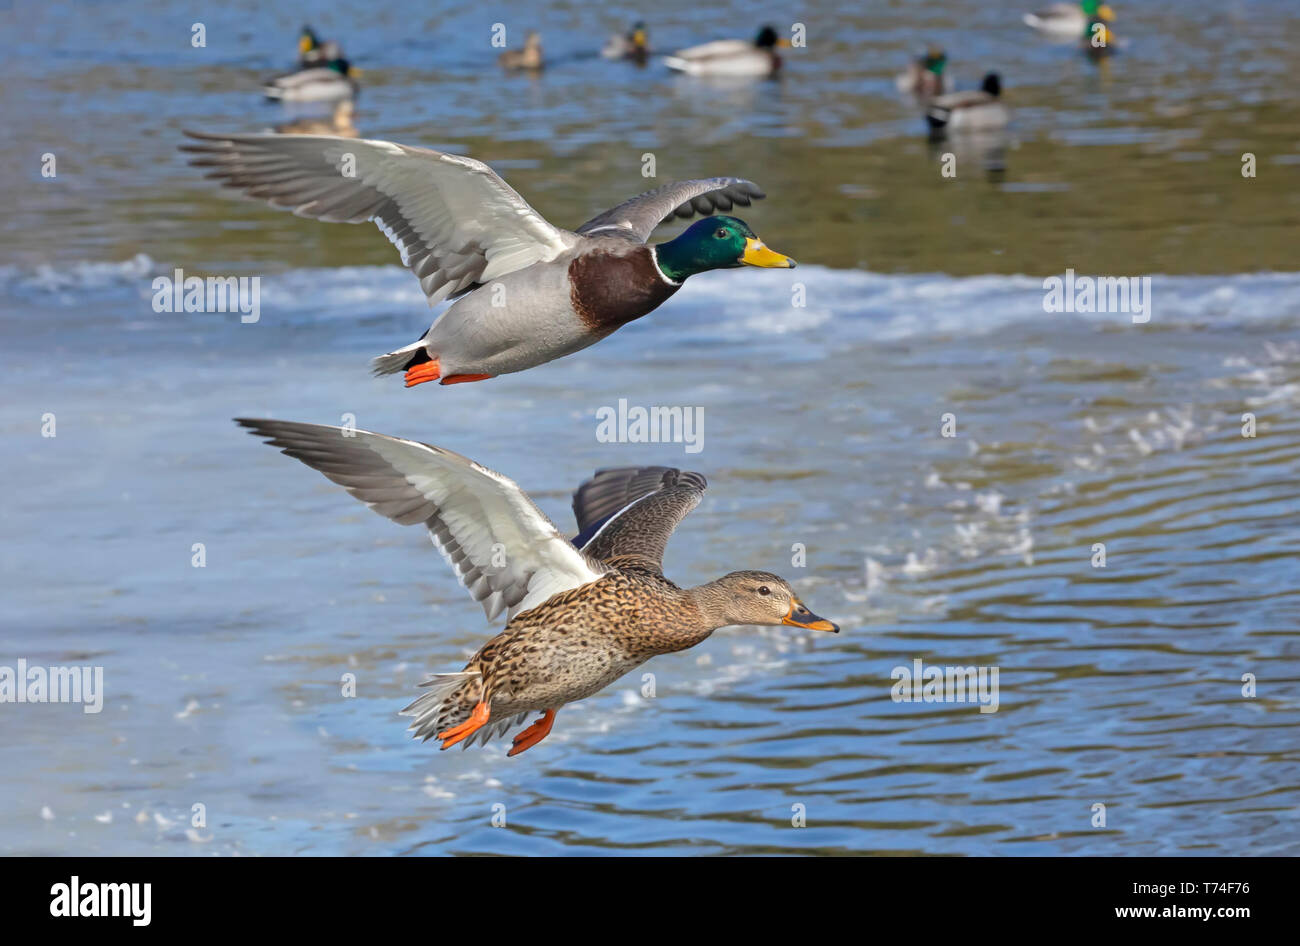 Male and female Mallards (Anas platyrhynchos) taking off from a pond; Fort Collins, Colorado, United States of America Stock Photo